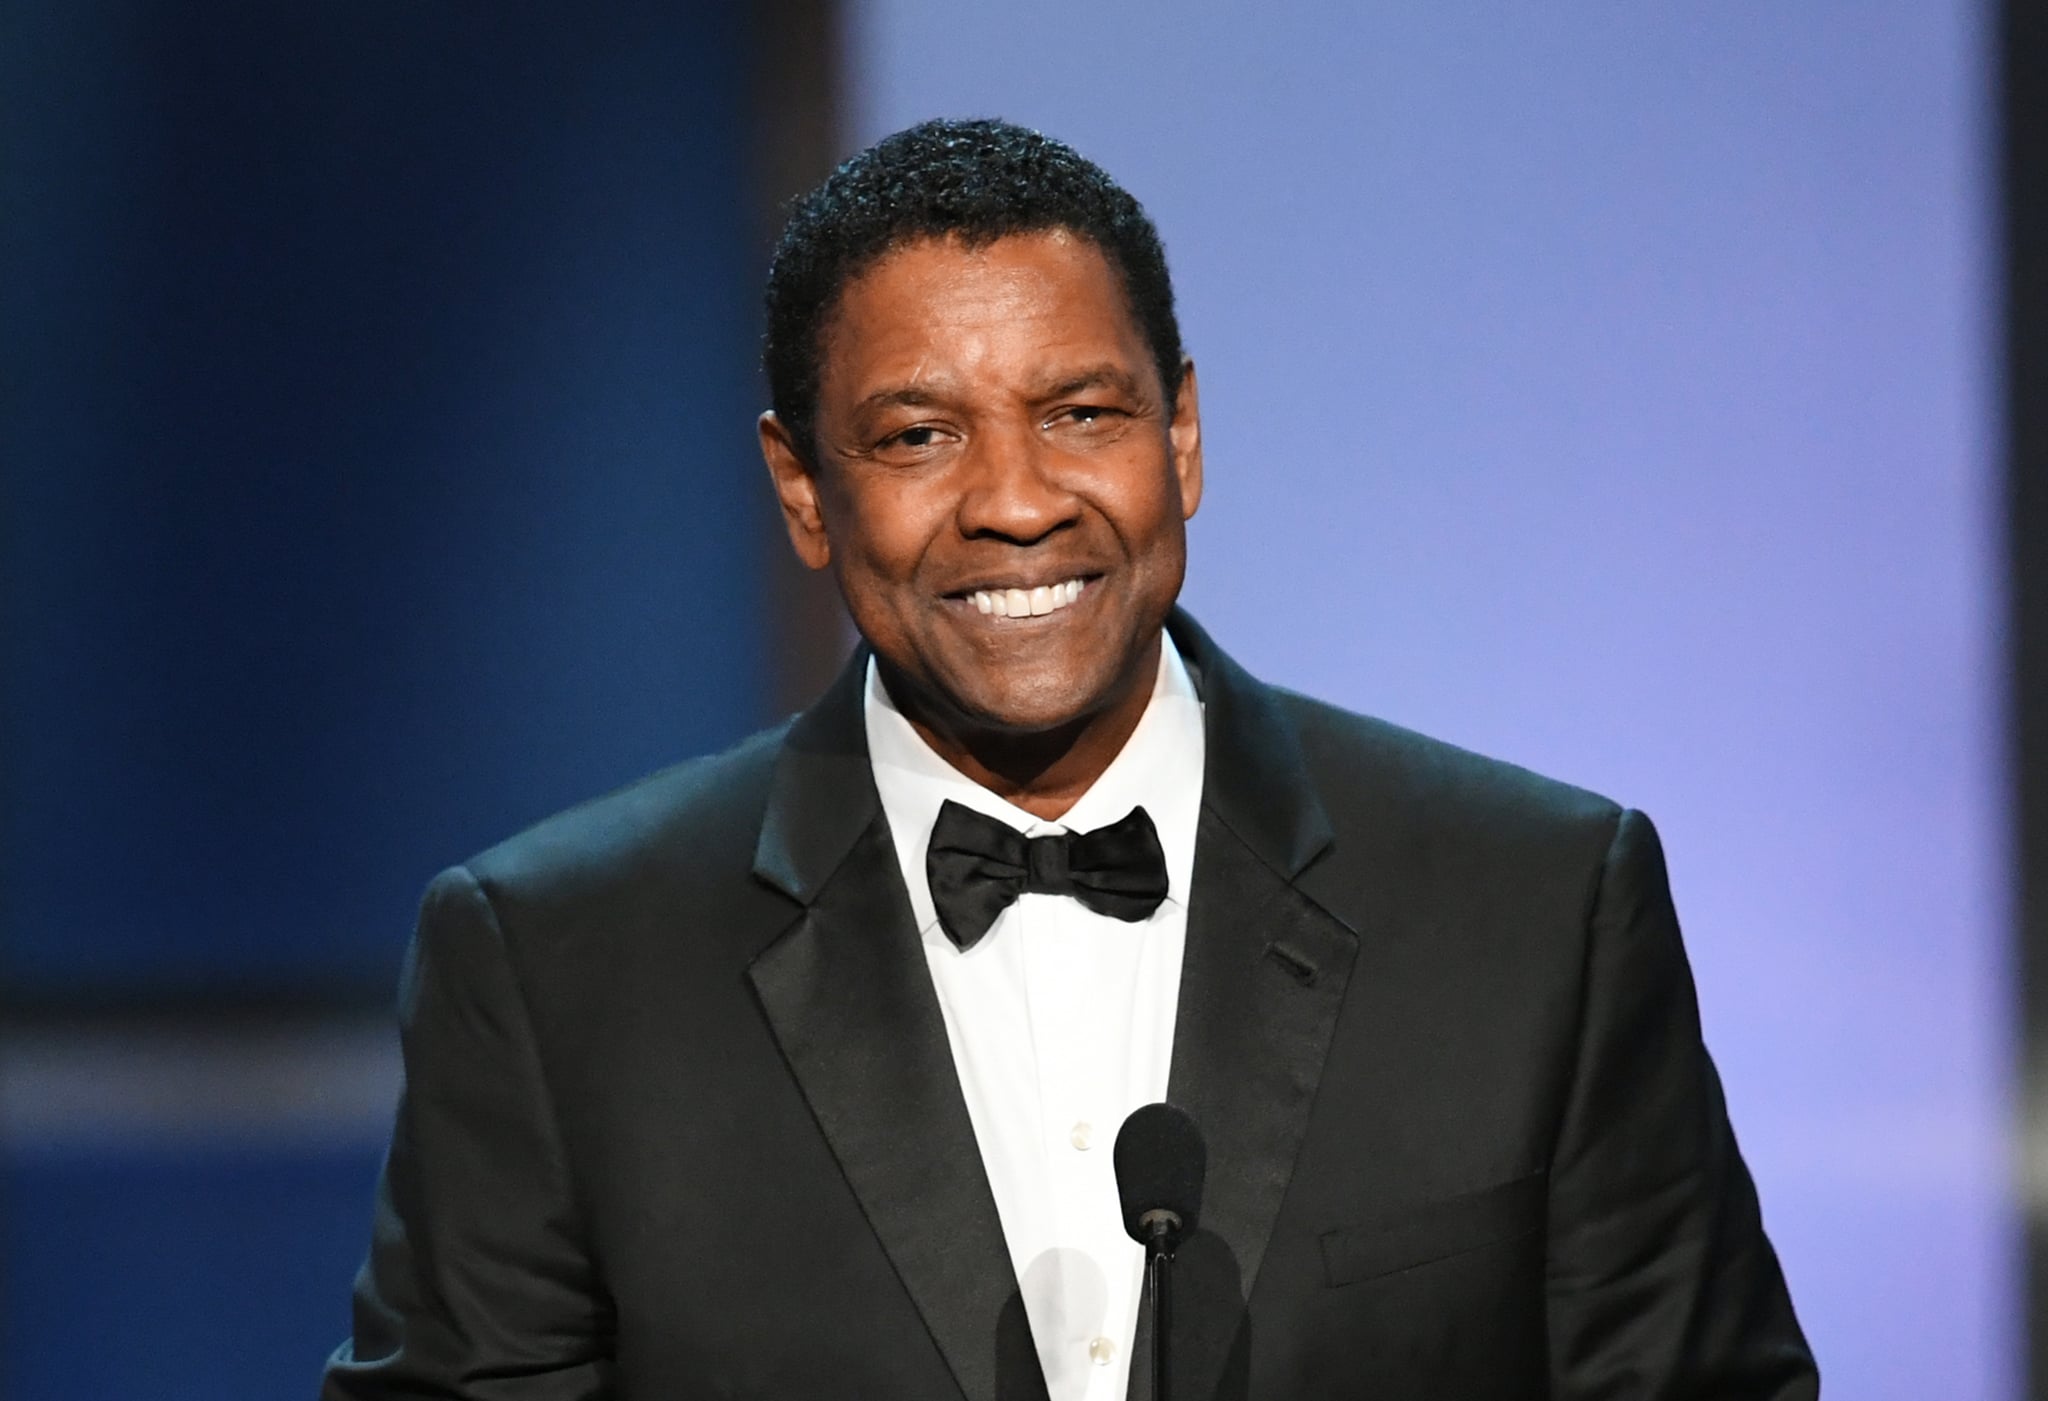 HOLLYWOOD, CALIFORNIA - JUNE 06: Honouree Denzel Washington speaks onstage during the 47th AFI Life Achievement Award honouring Denzel Washington at Dolby Theatre on June 06, 2019 in Hollywood, California. (Photo by Kevin Winter/Getty Images for WarnerMedia) 610265